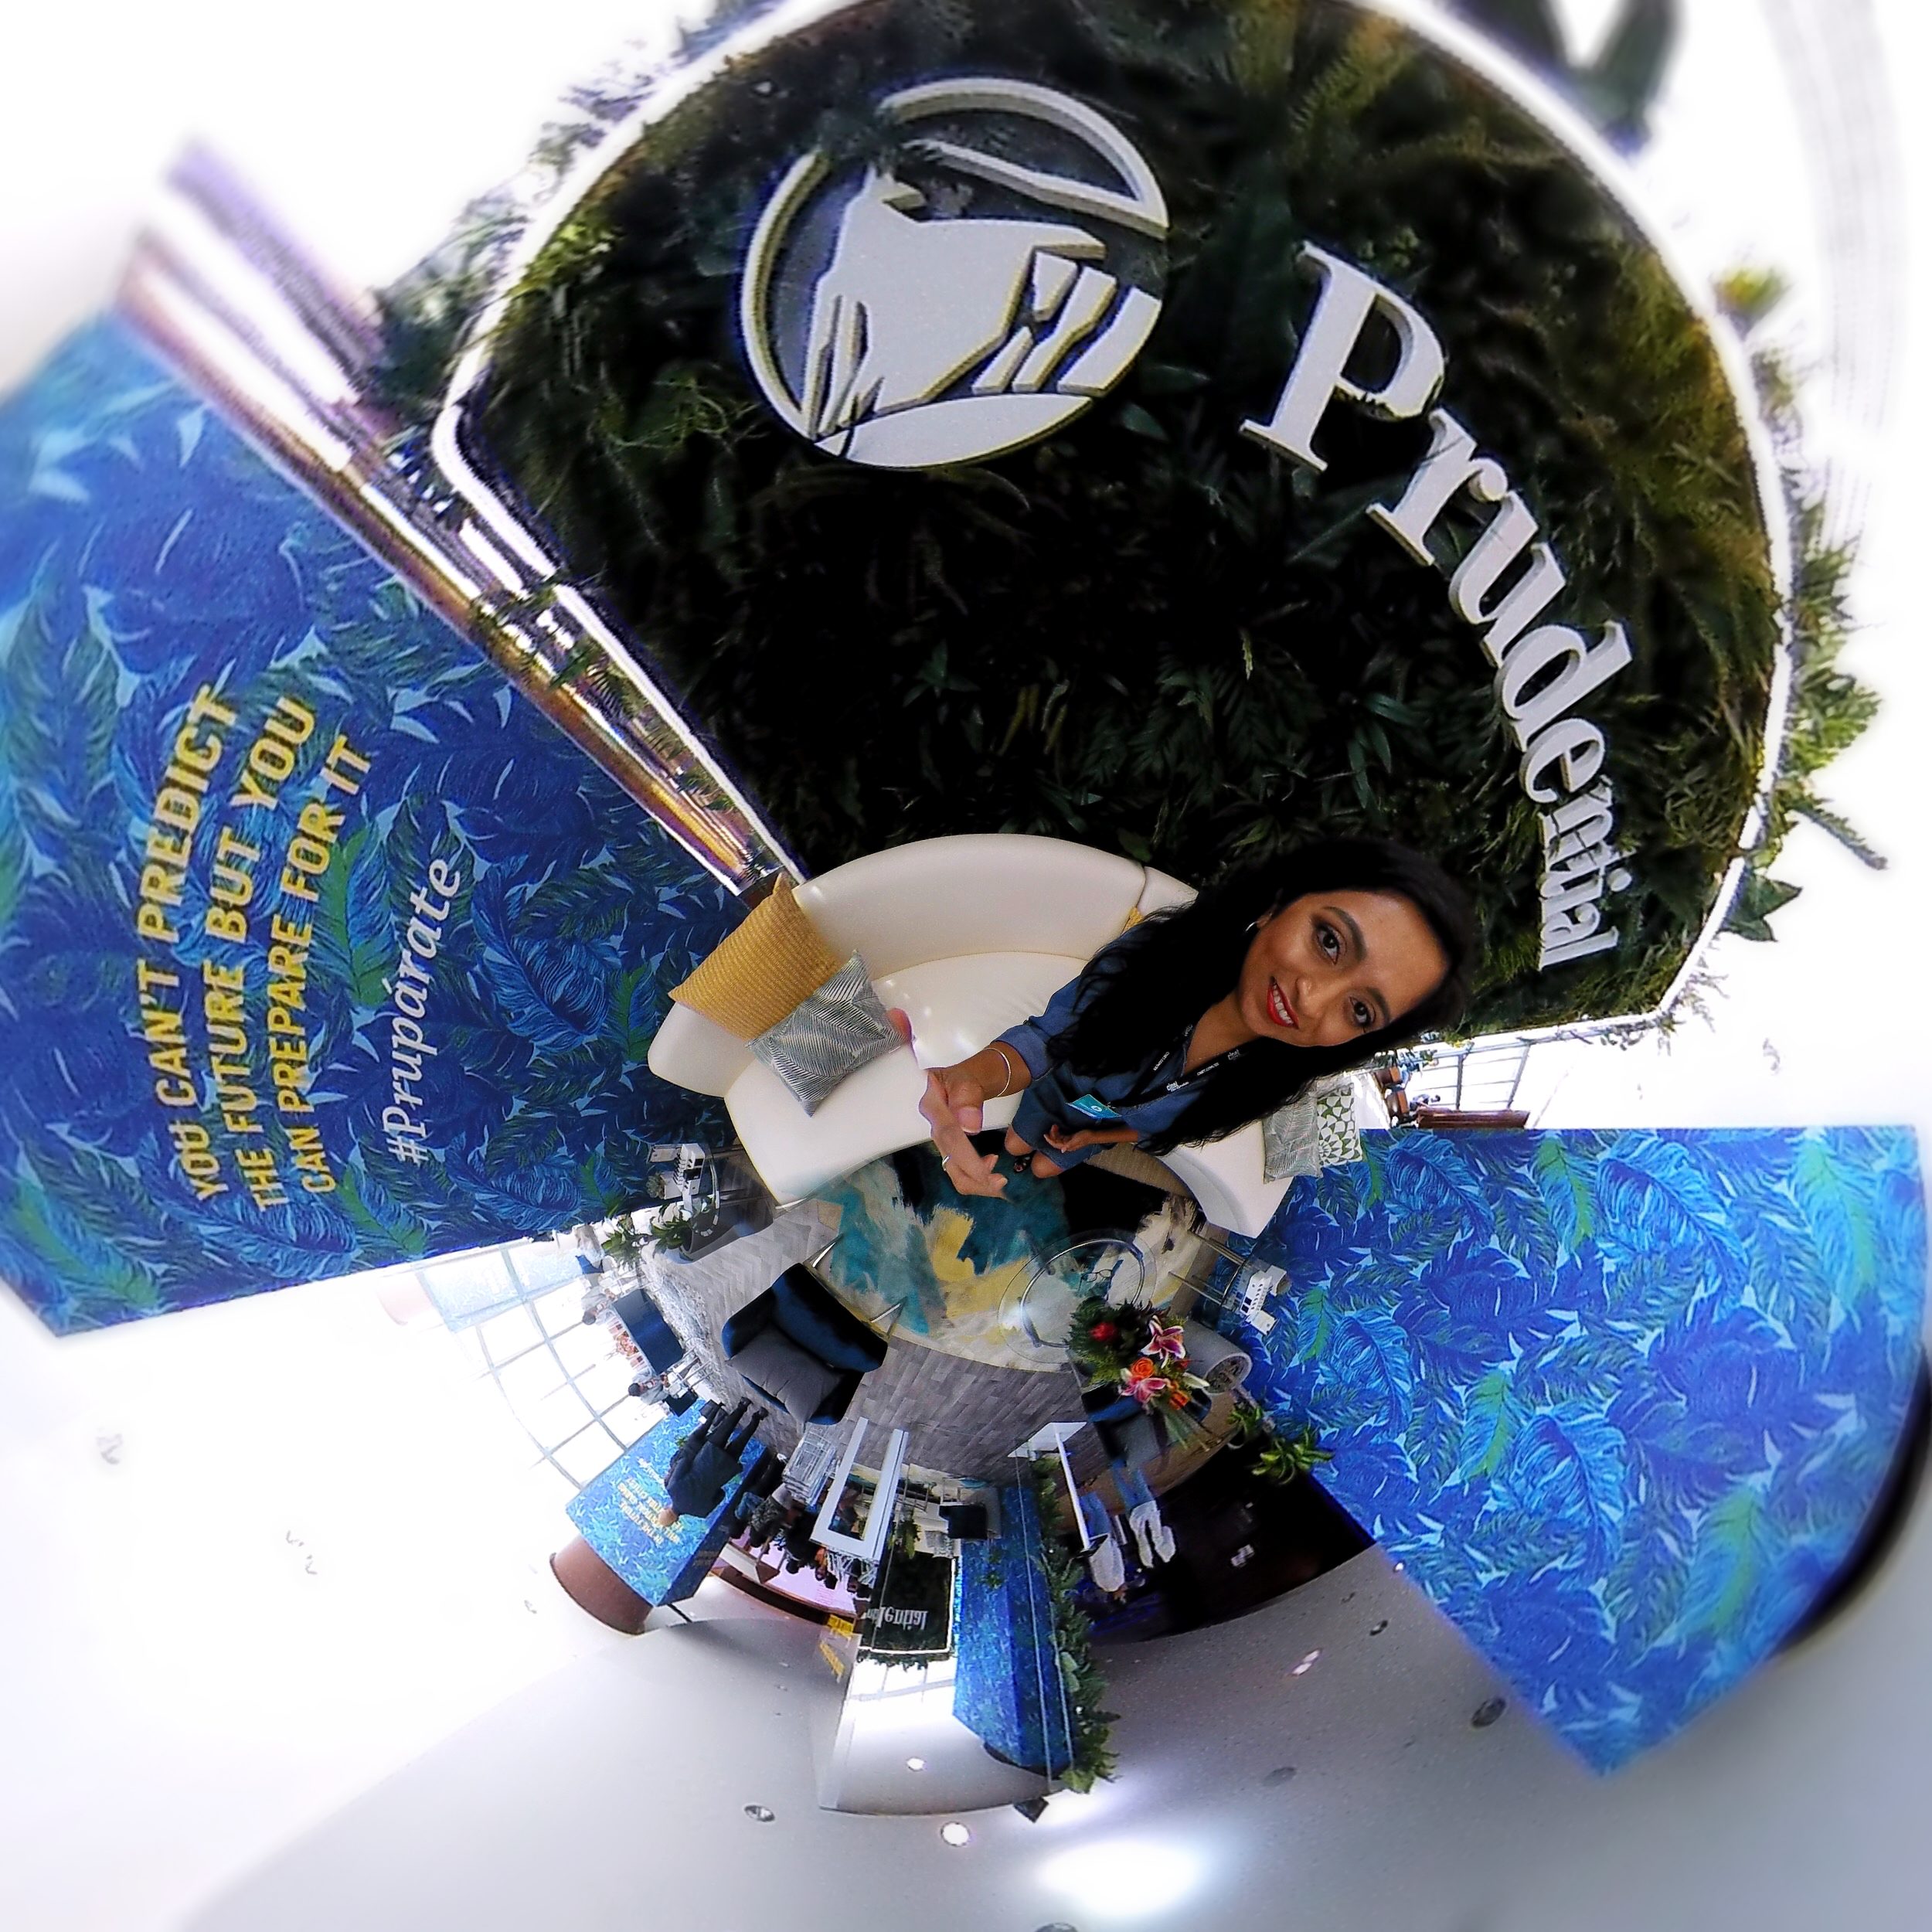 TINY PLANET - 360° Photos of Prudential Suite Financially Planning for Your Future HIspanicize 2018